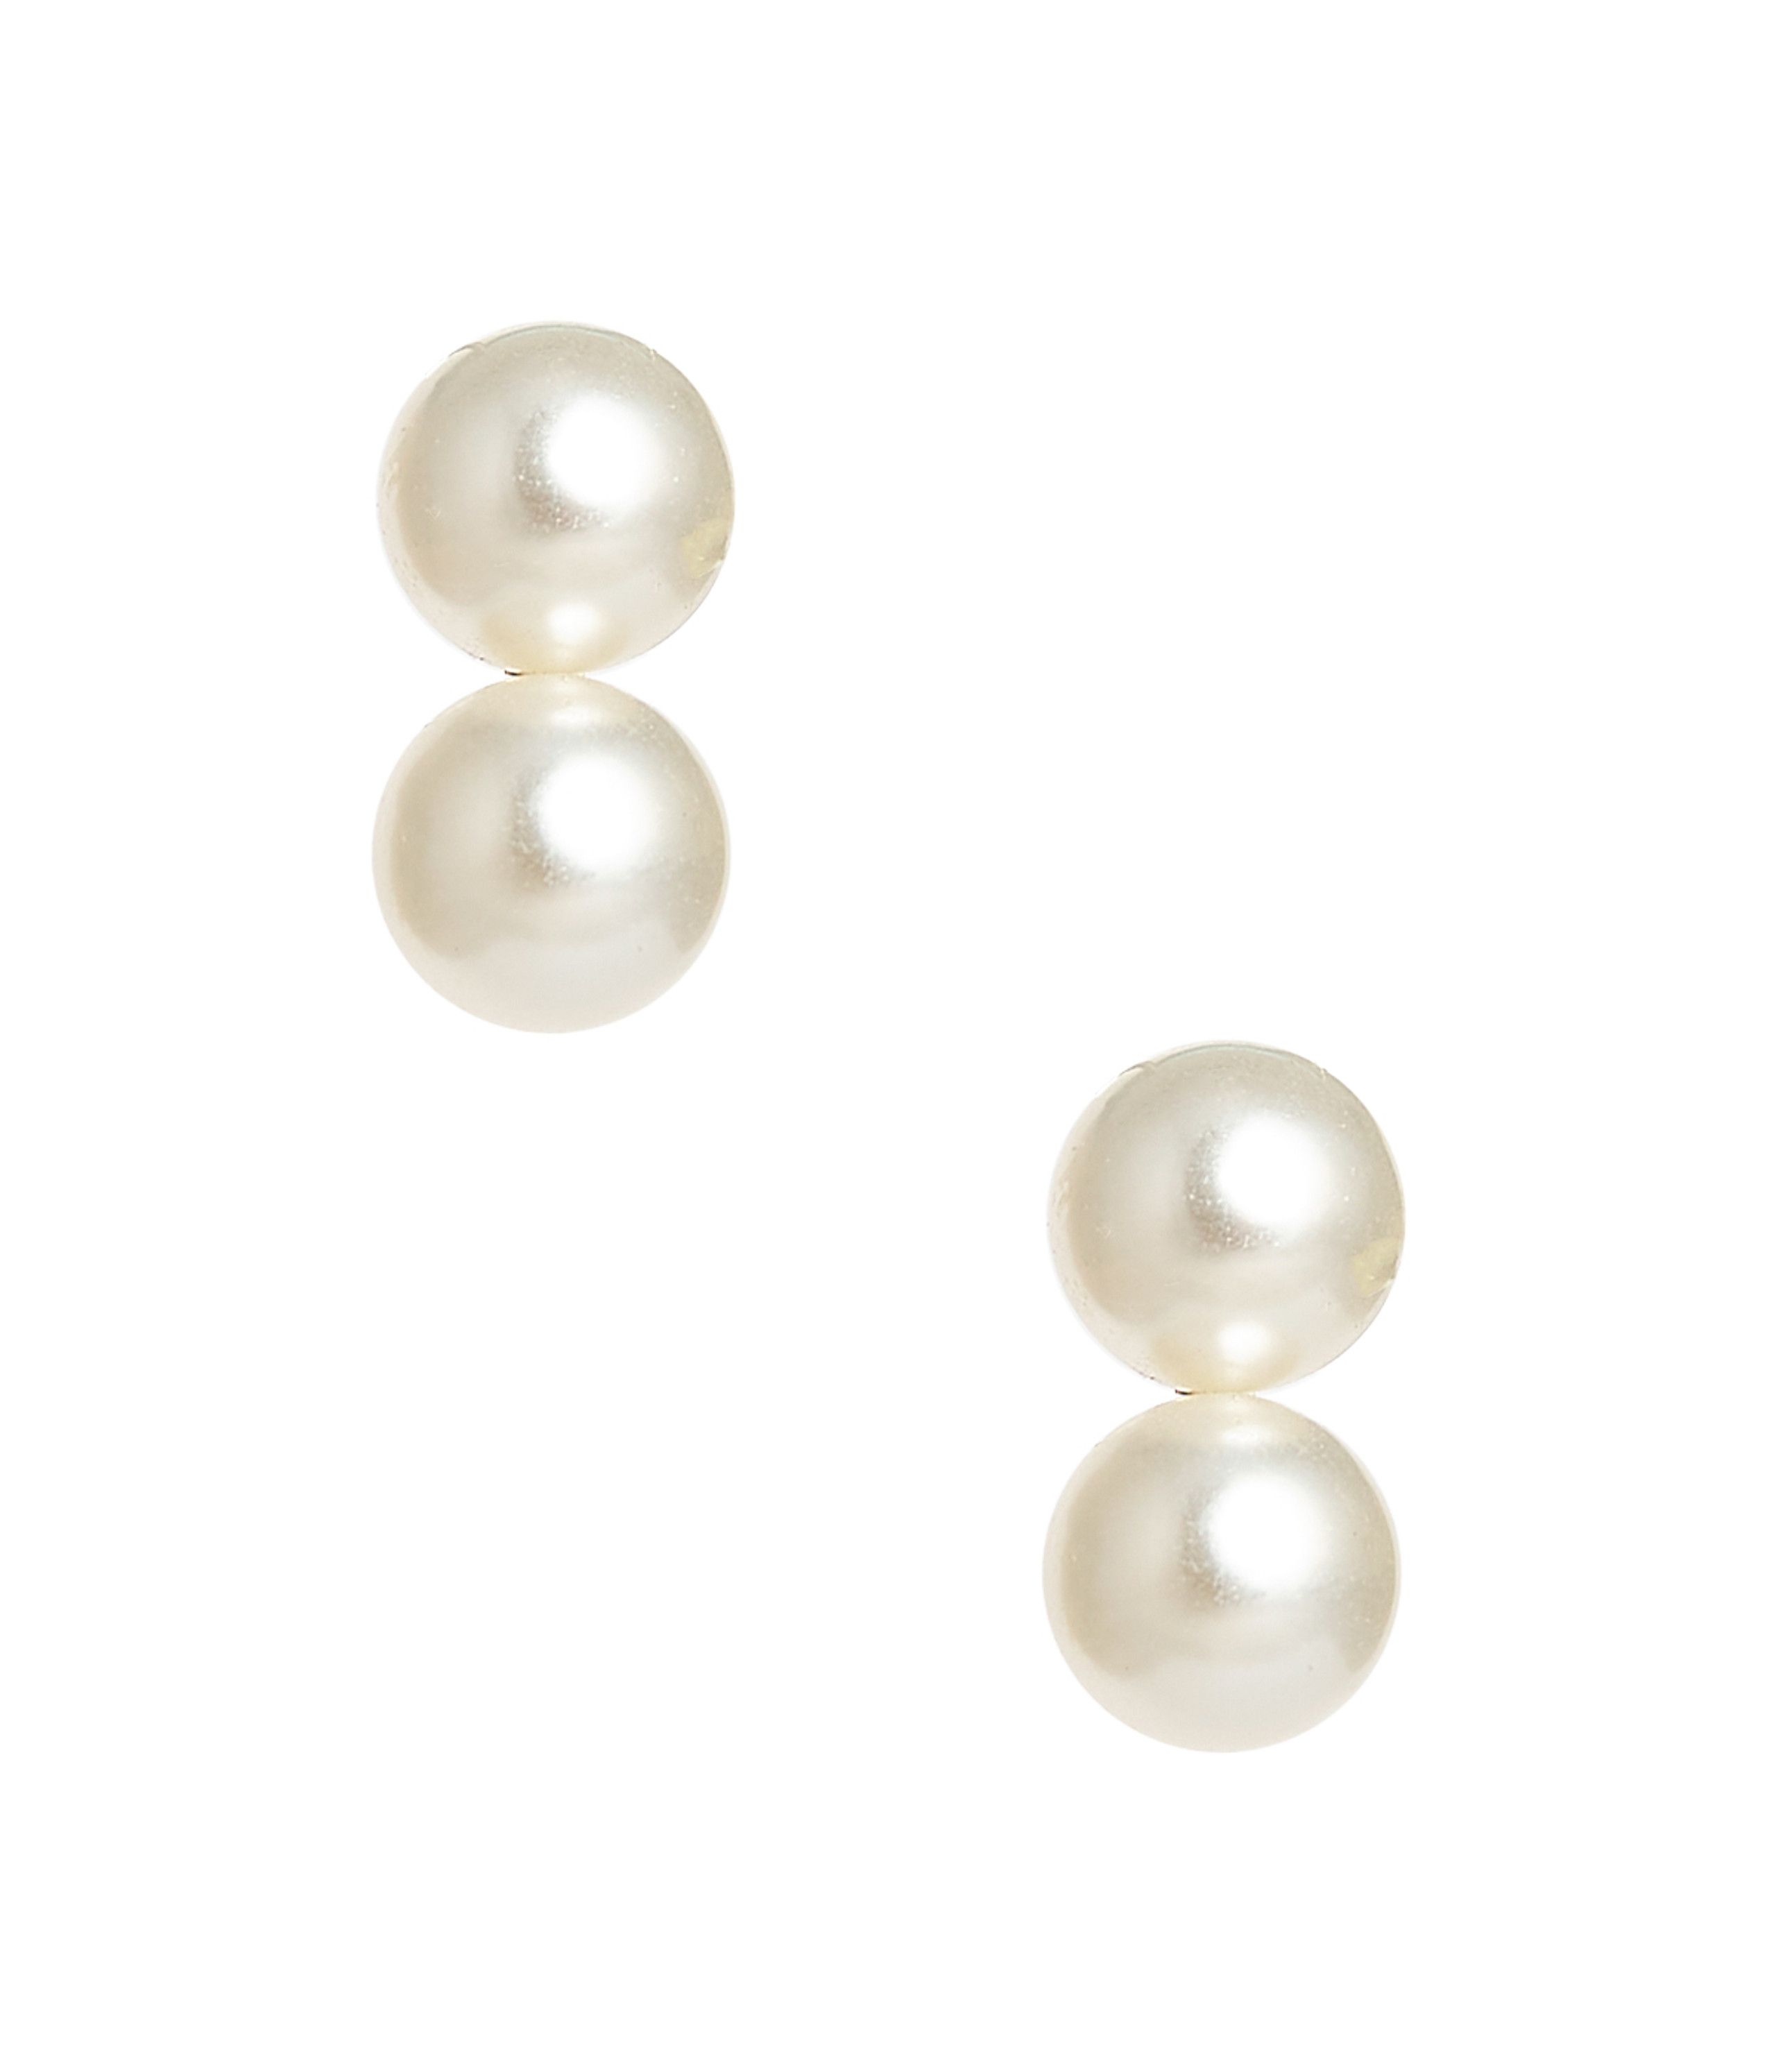 Large Belle - Double Pearl earrings - Belle of  the Ball | Lisi Lerch Inc